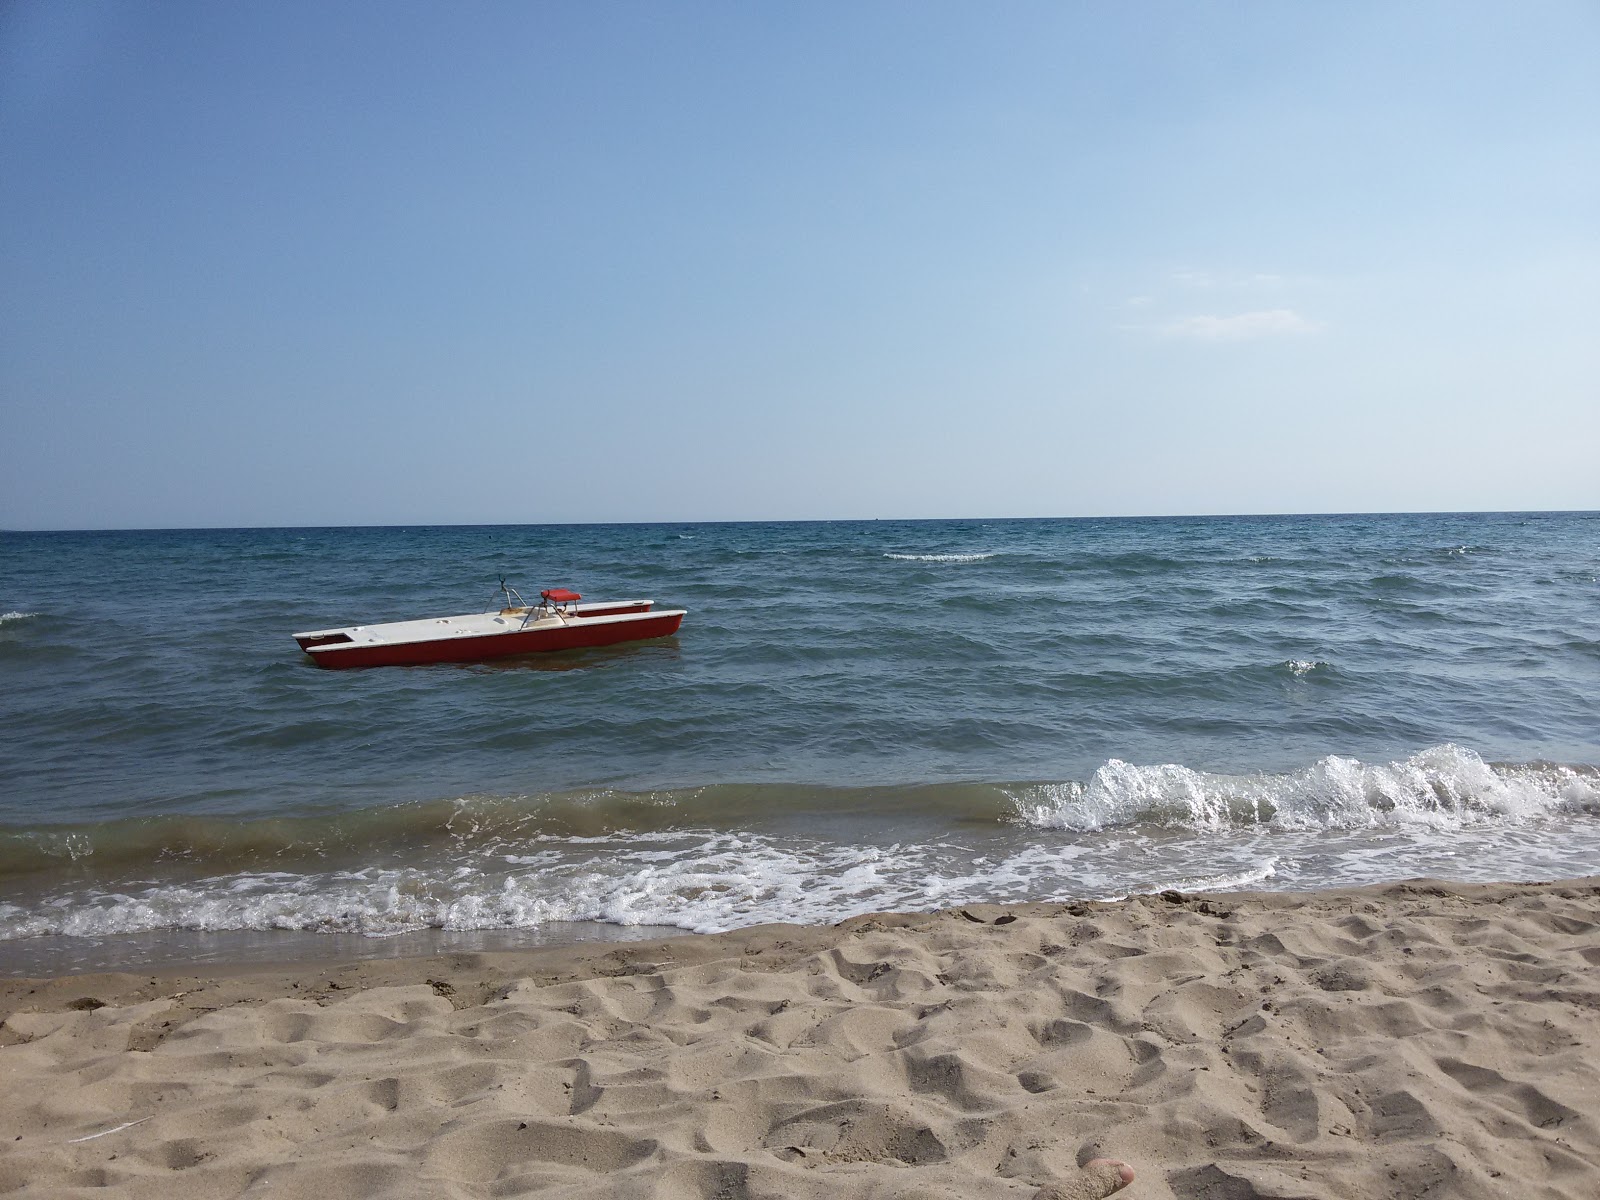 Photo of Spiaggia di Verde Mare - popular place among relax connoisseurs